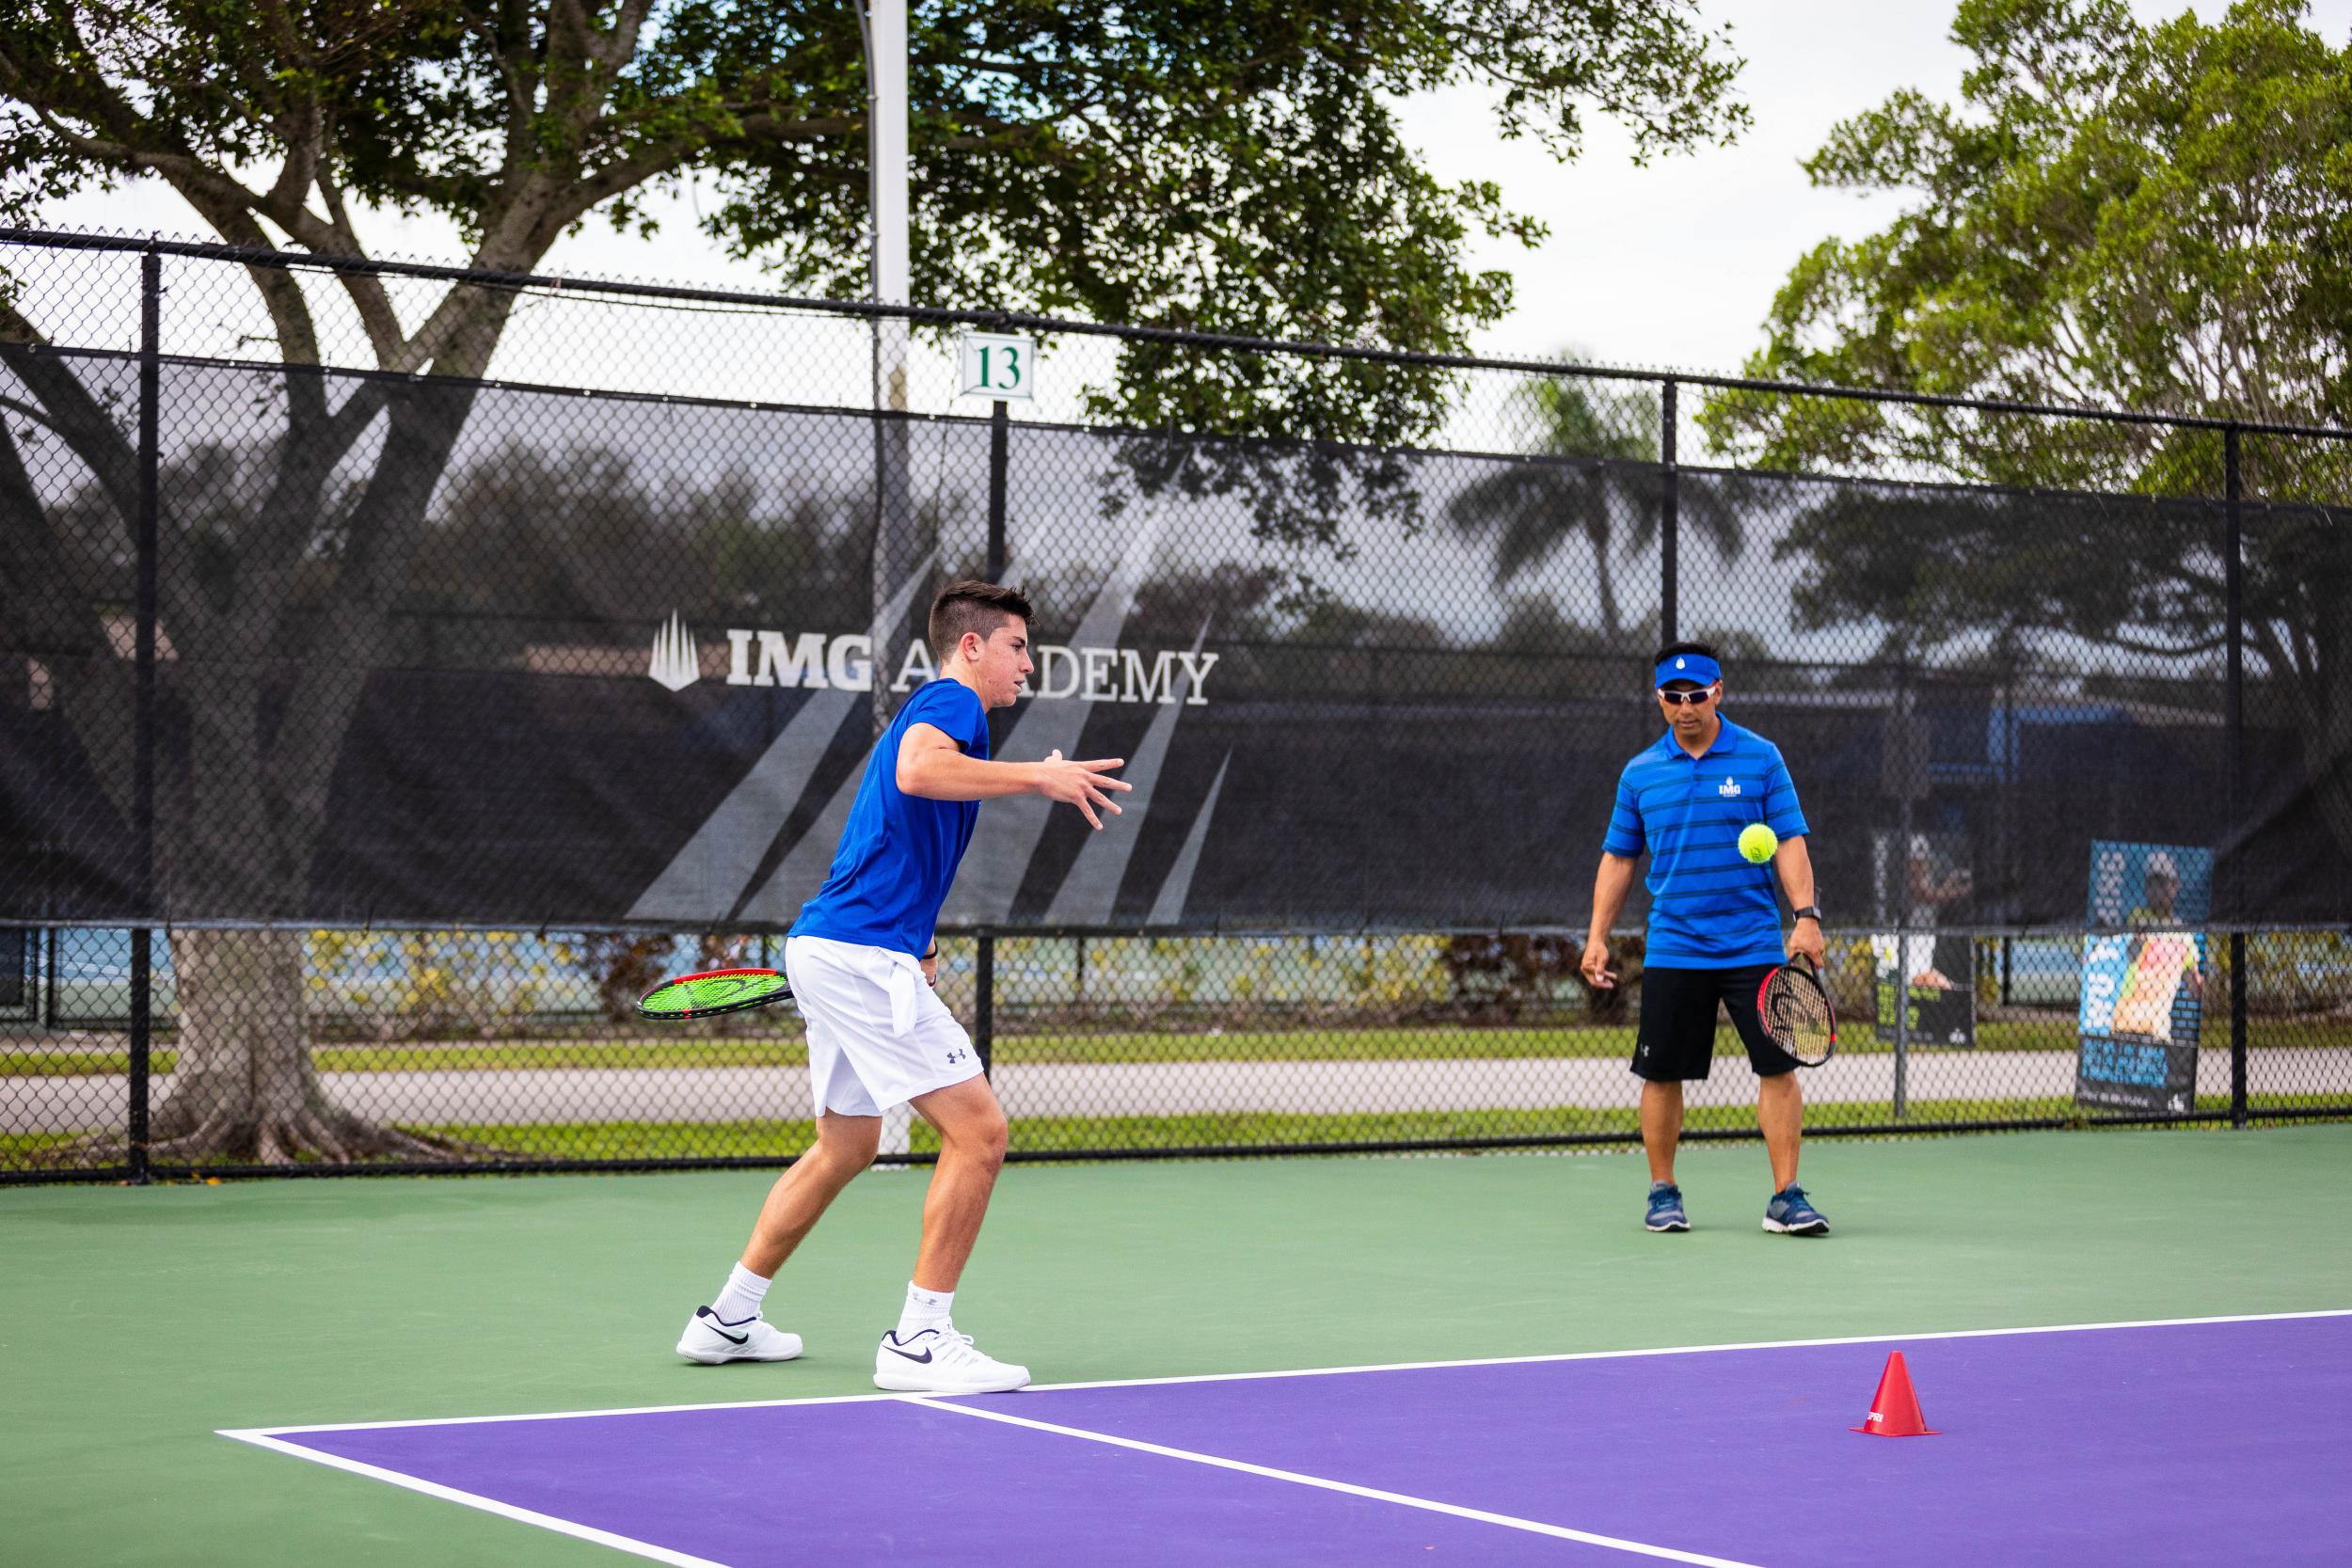 3 Tennis Drills to Hit a Better Forehand IMG Academy